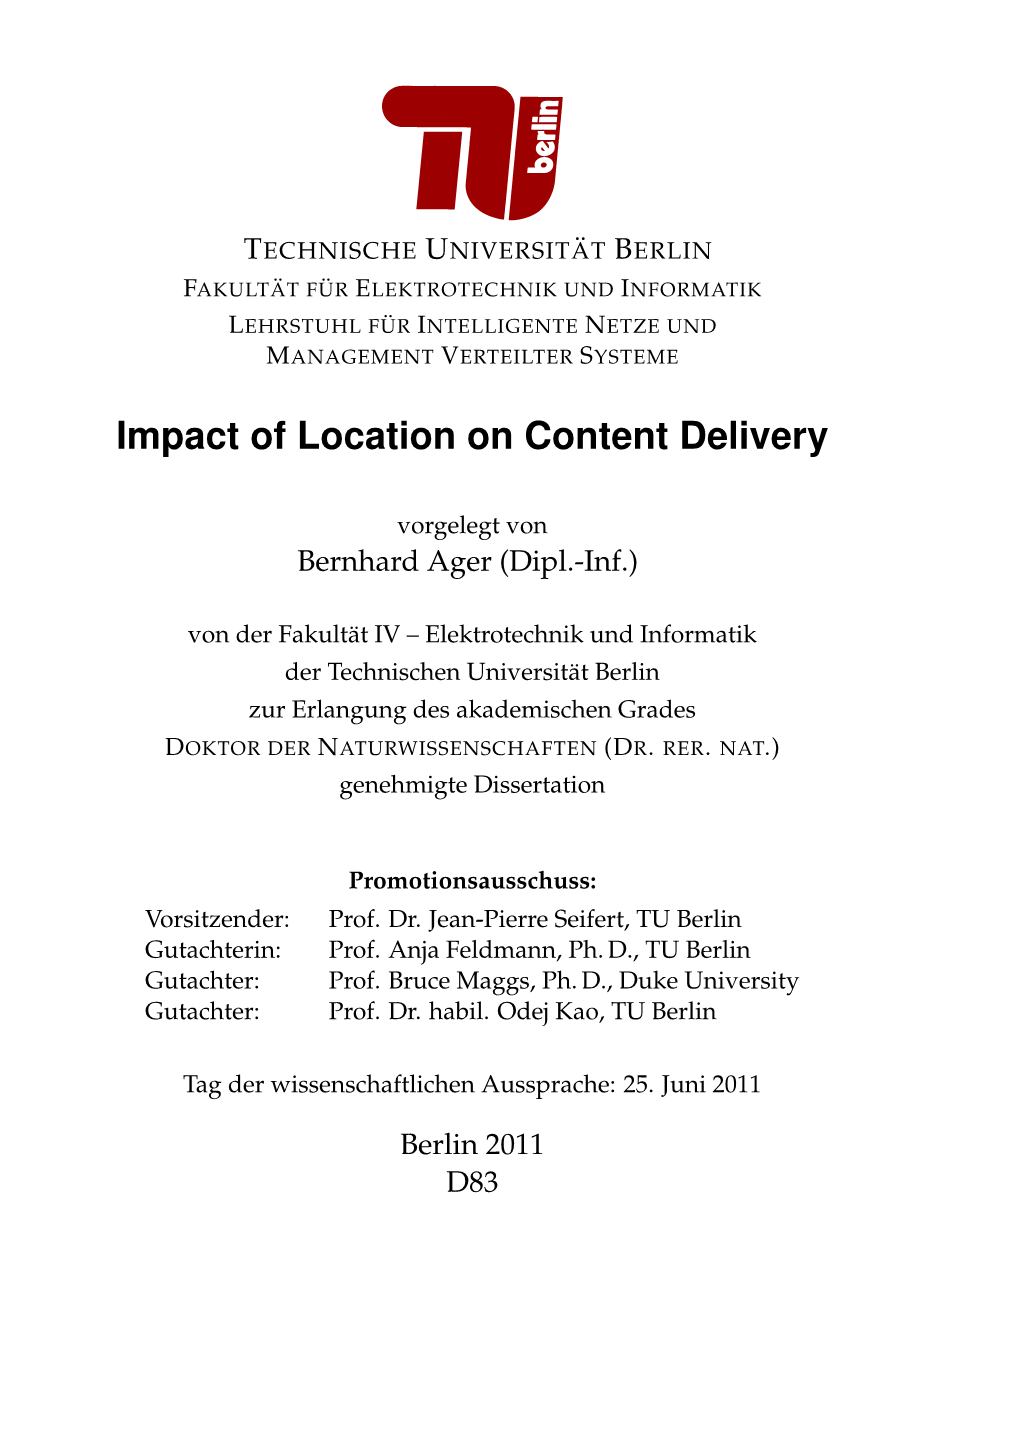 Impact of Location on Content Delivery